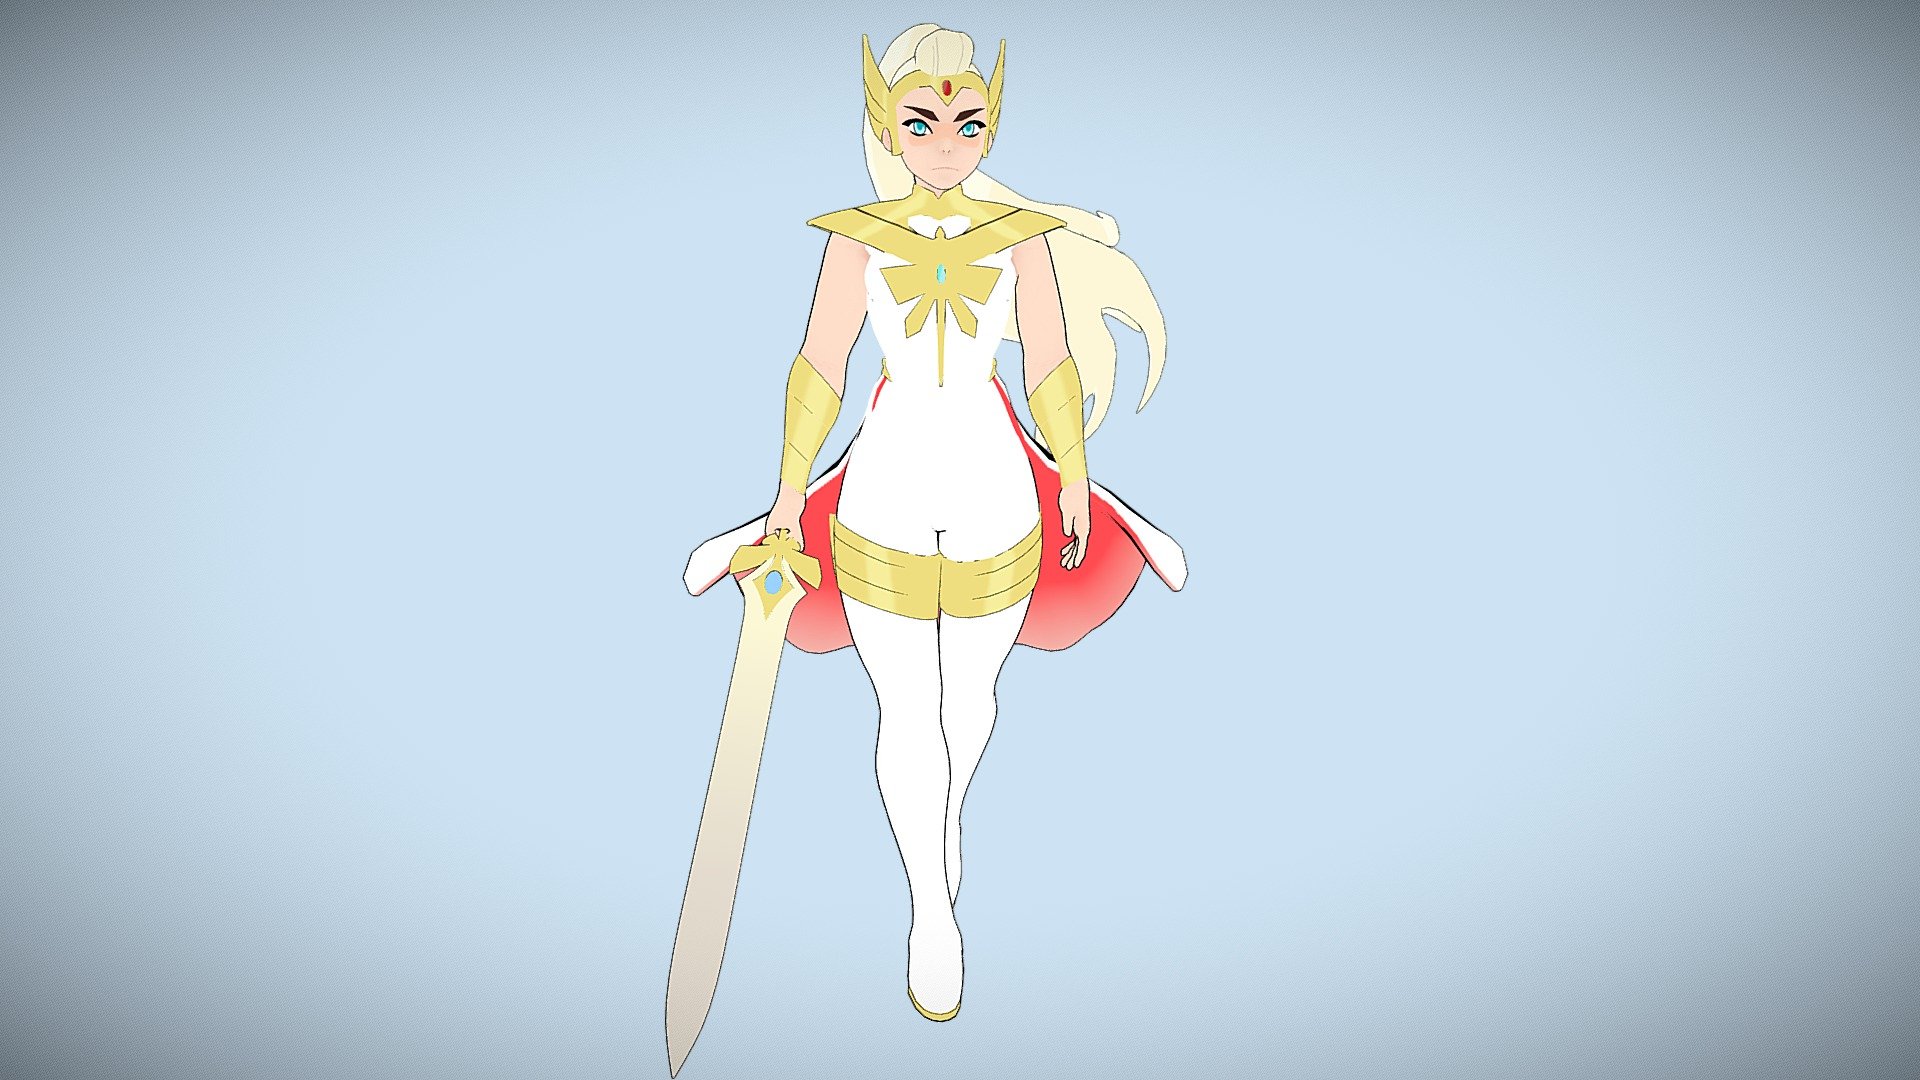 An avatar made by me for VRChat and Vtubing inspired by the new version of She-ra from Netflix! - She-ra - 3D model by Natam.Antony 3d model